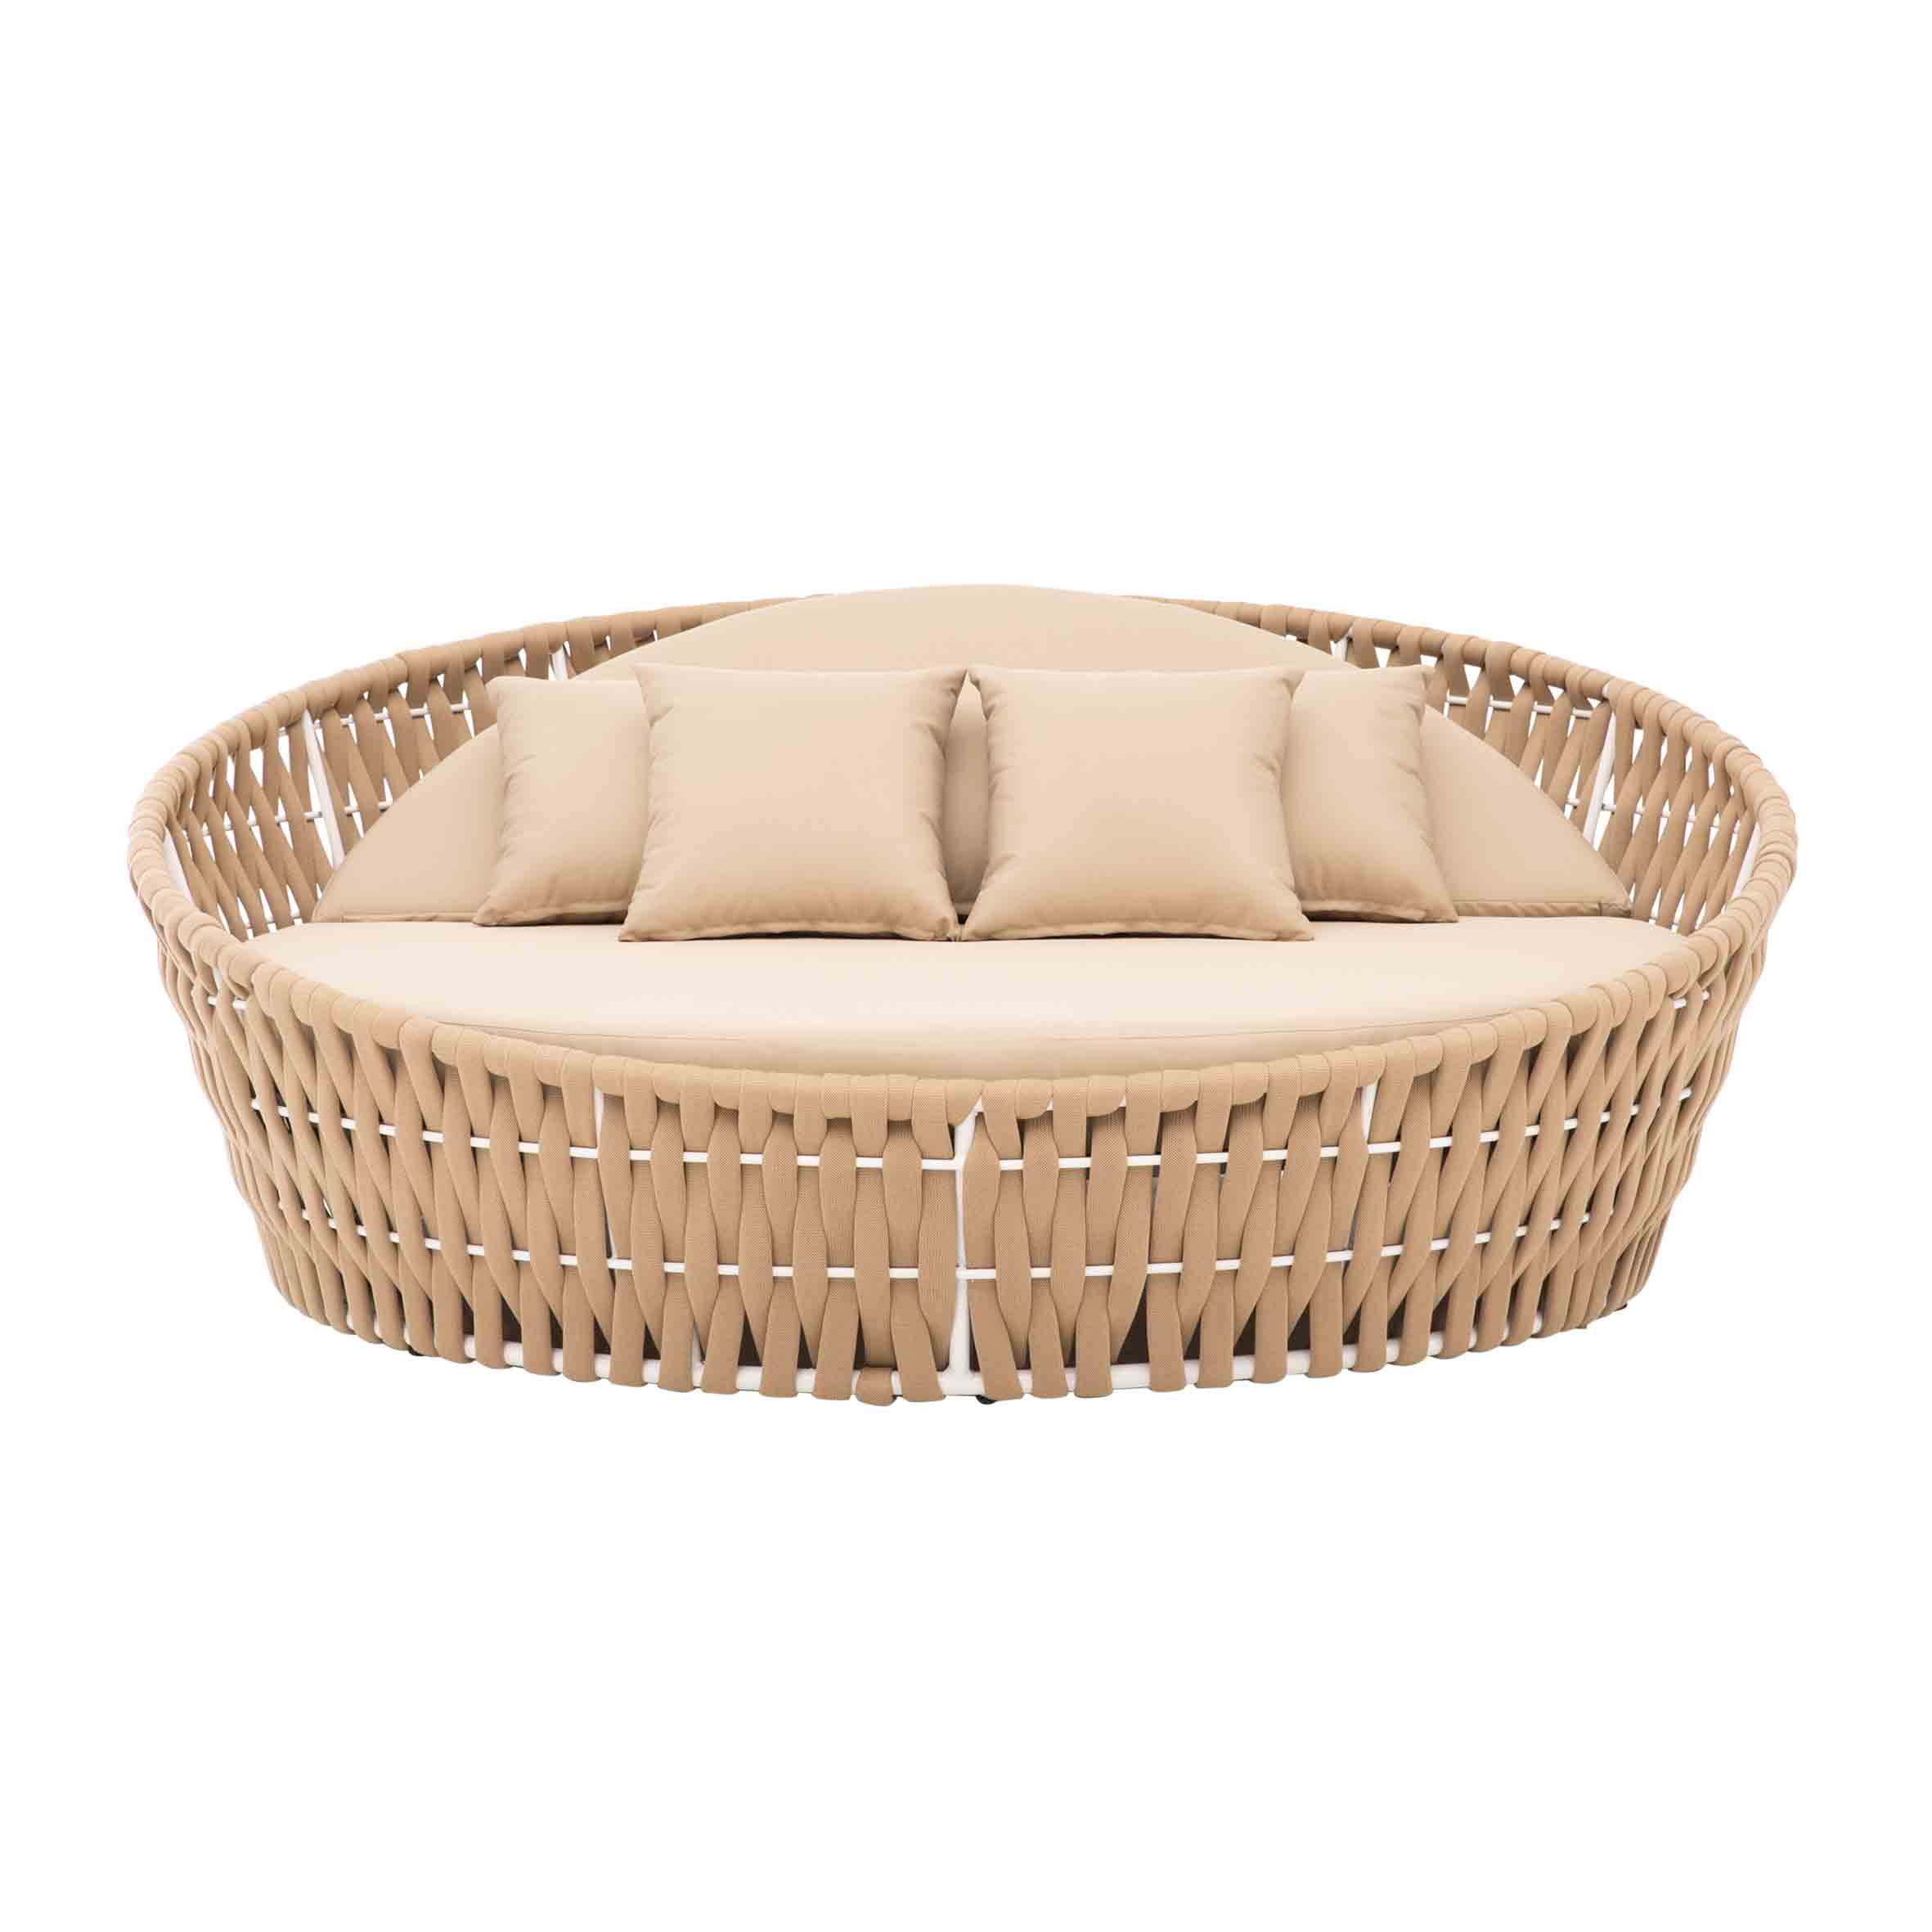 Art Rope rond daybed S4